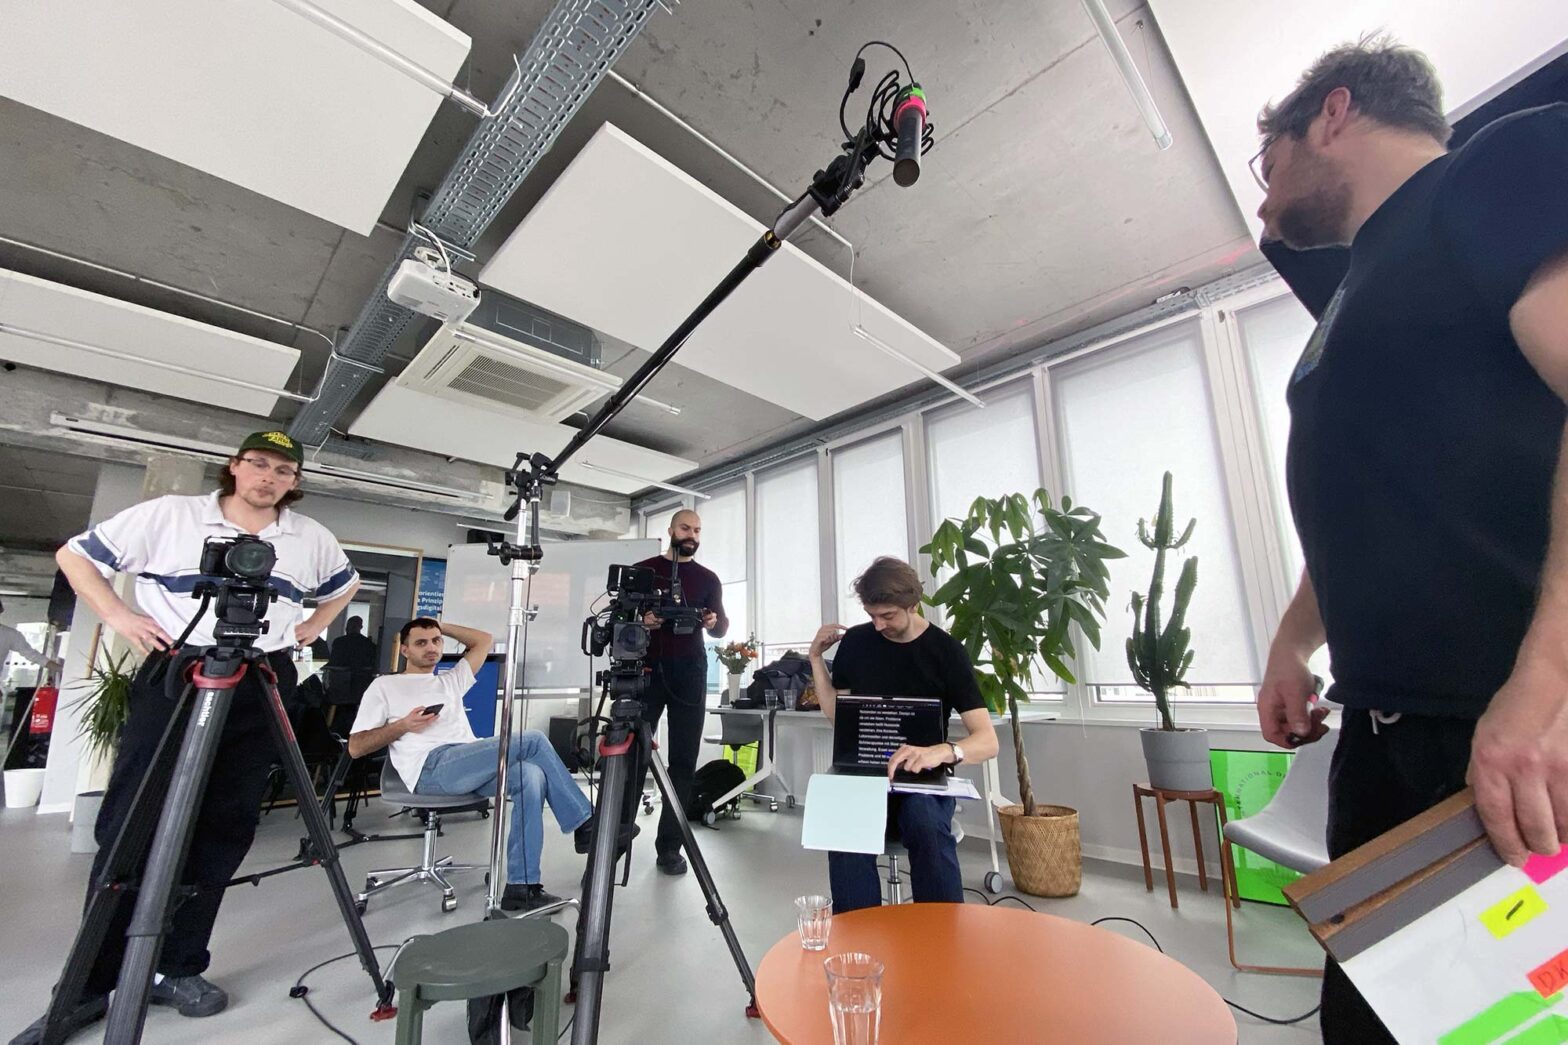 A group of 5 men with professional camera equipment in a modern office space with bare concrete walls